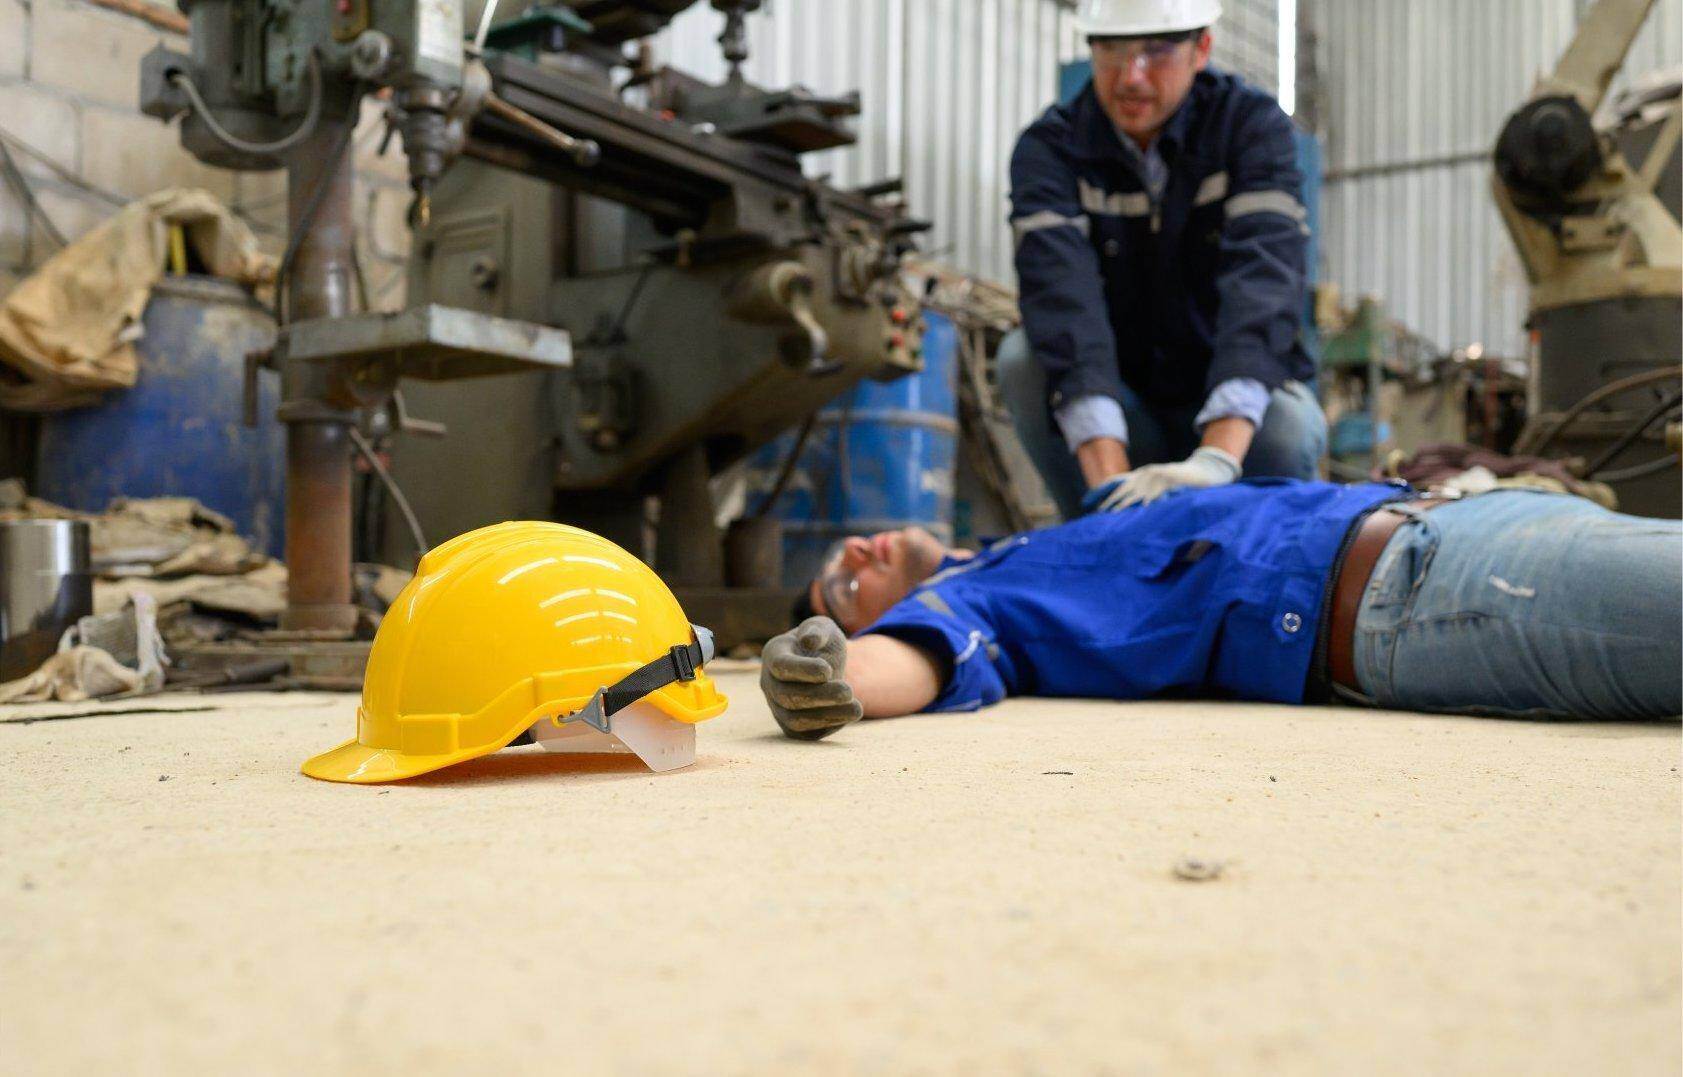 An unconscious man who has been injured on the job who will file for workers compensation in Martinez, Georgia